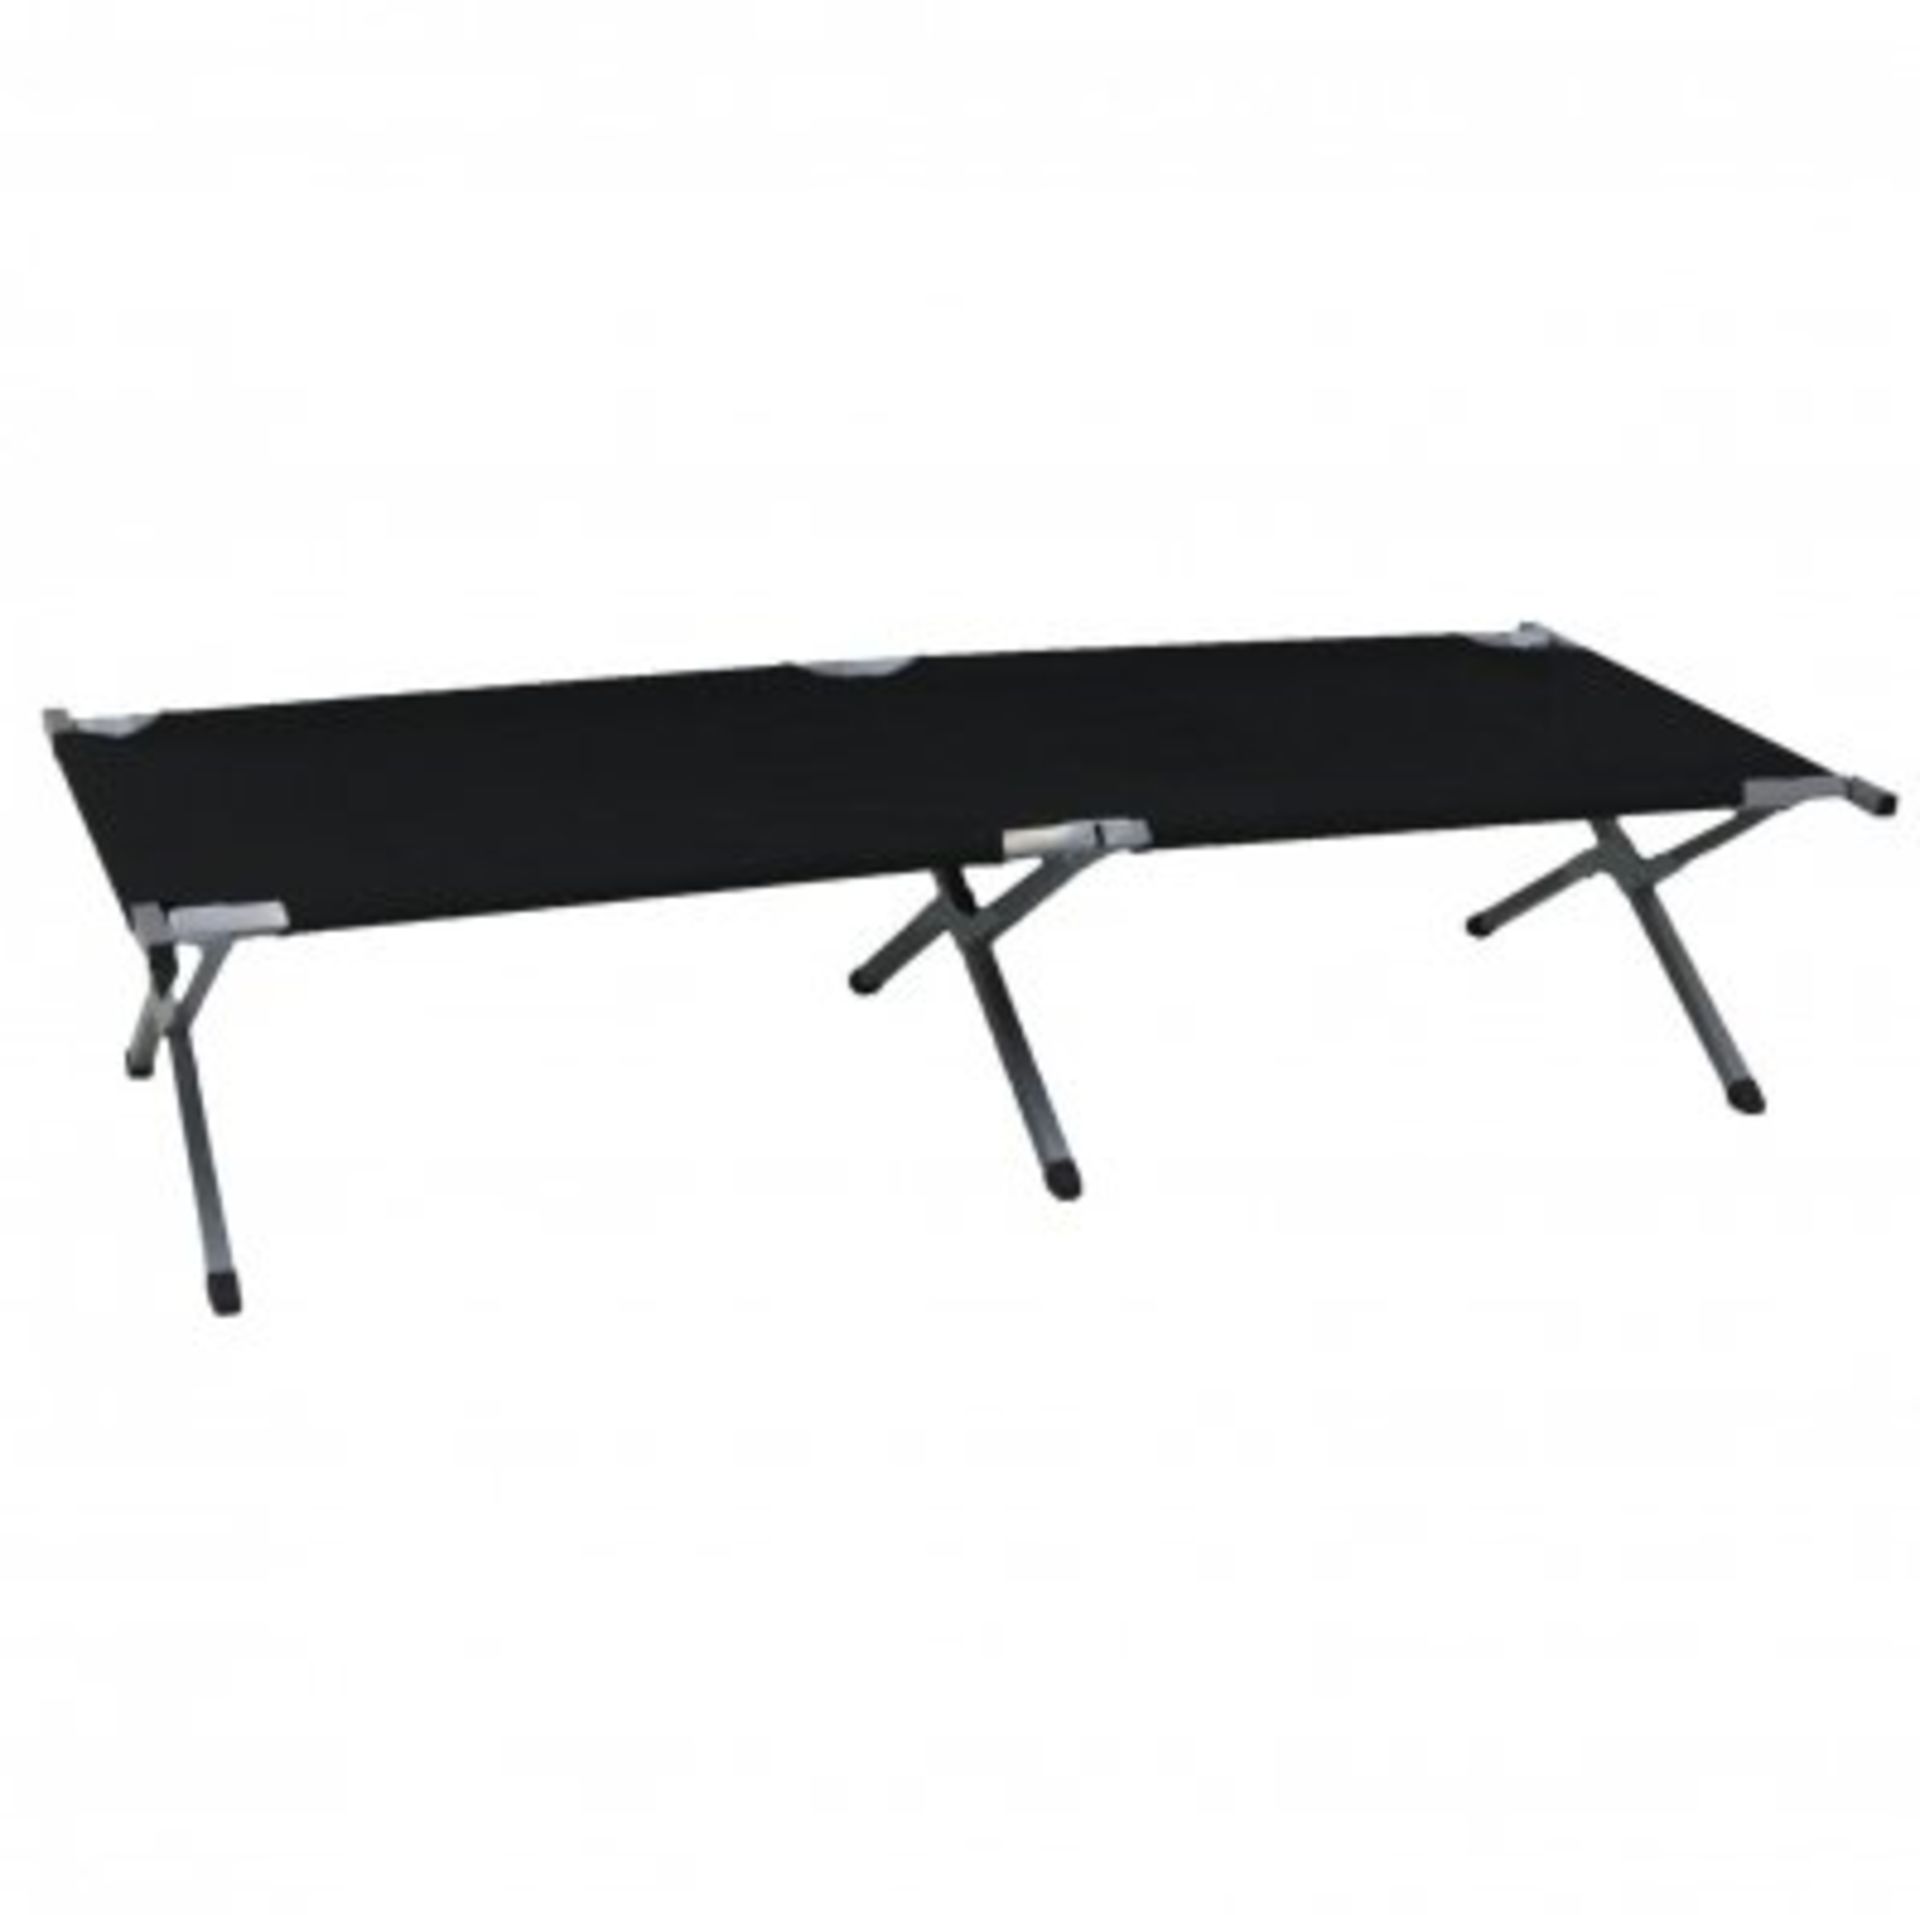 (SK151) 3m Aluminium Folding Wallpaper Pasting Decorating Table The pasting table is ideal...